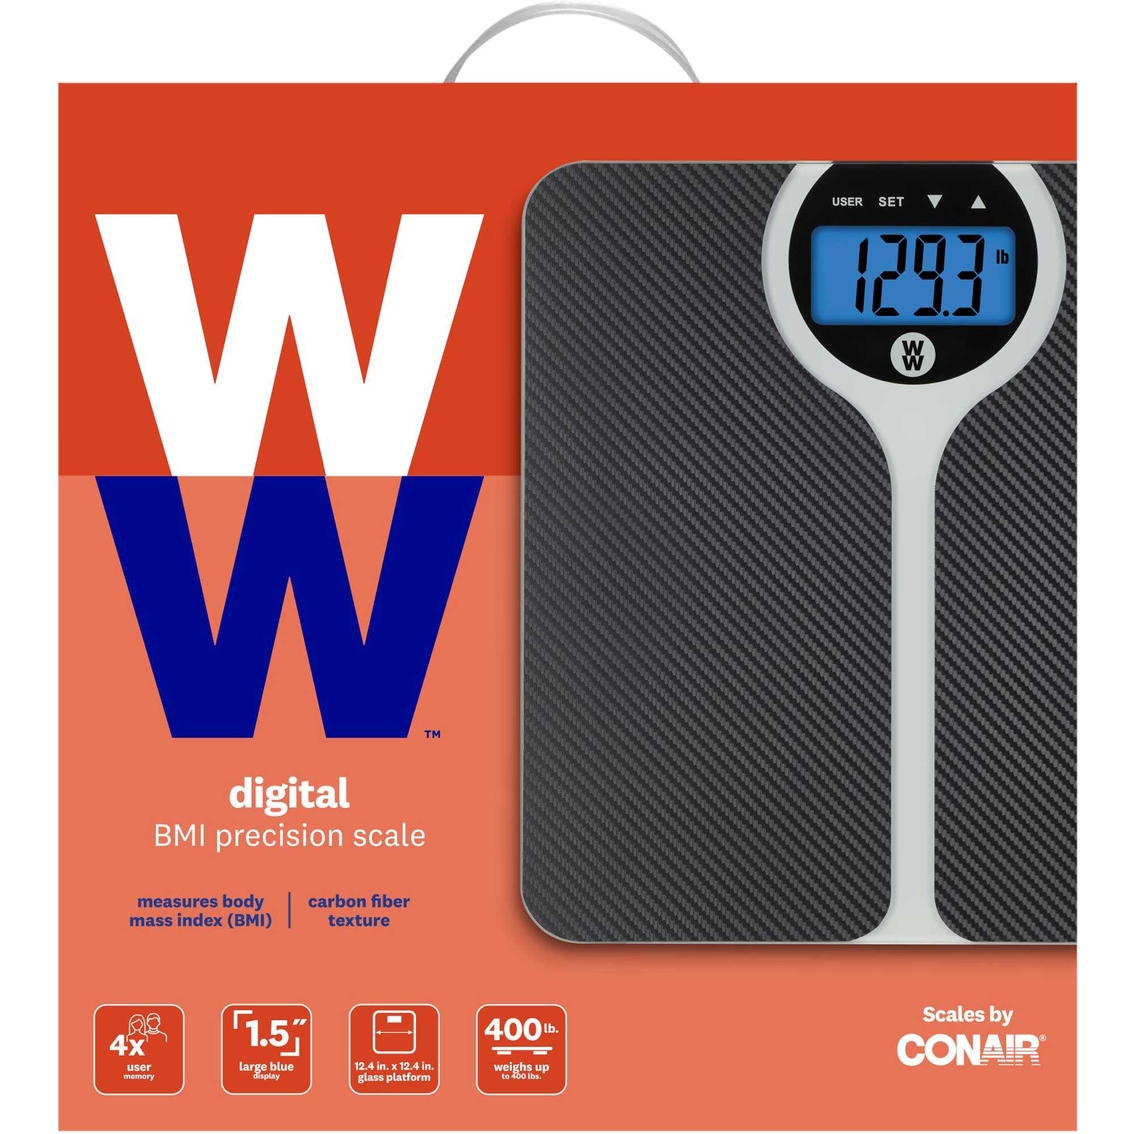 WW Scales by Conair Digital Carbon Fiber BMI Scale - Image 8 of 8